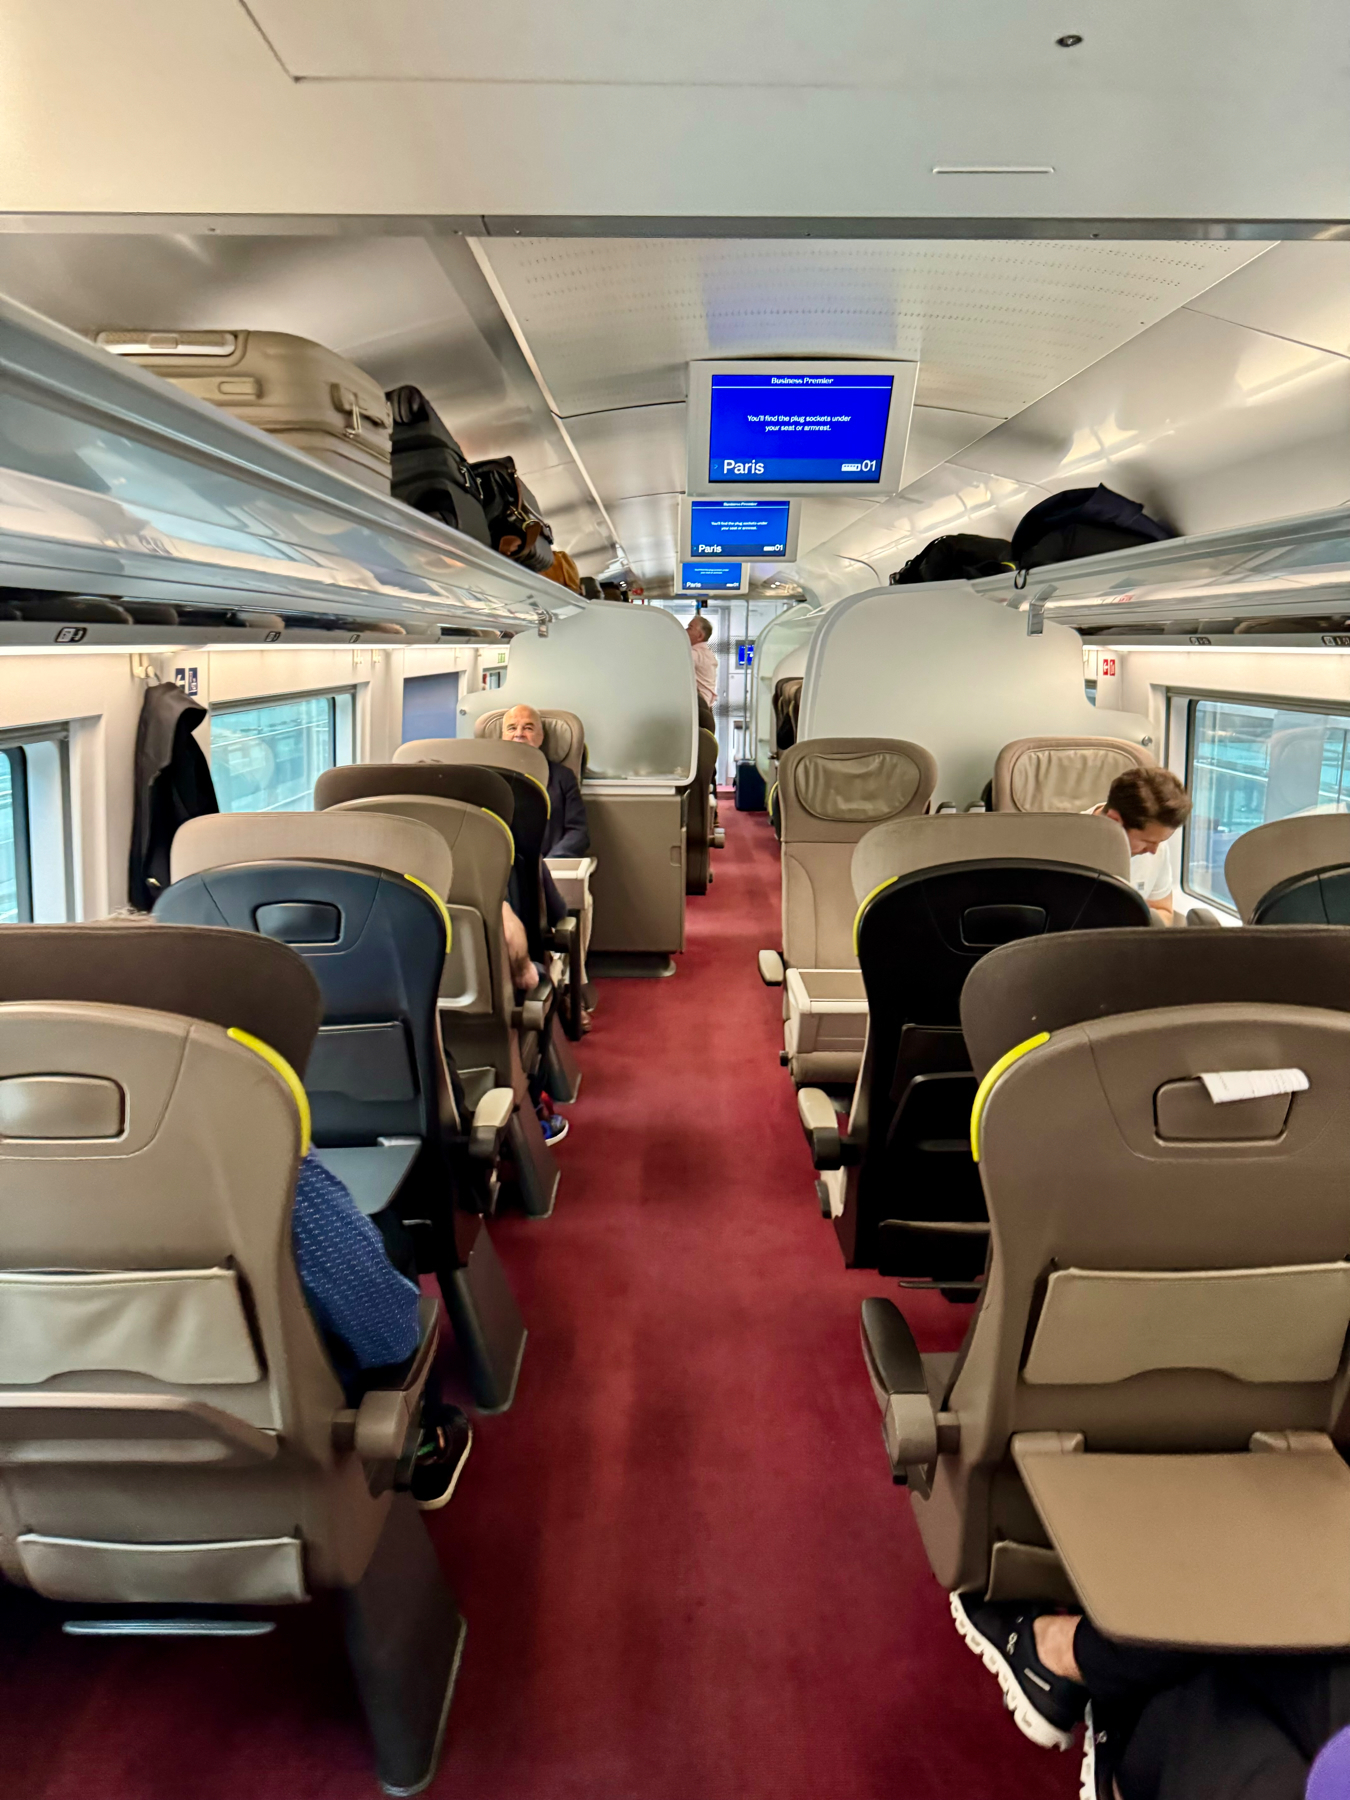 Interior of the Eurostar high-speed train car with business class seating. The seats are arranged in pairs, upholstered in grey with yellow accents. Overhead luggage racks hold various bags and suitcases. Digital screens display information about the destination, which is Paris. Pass